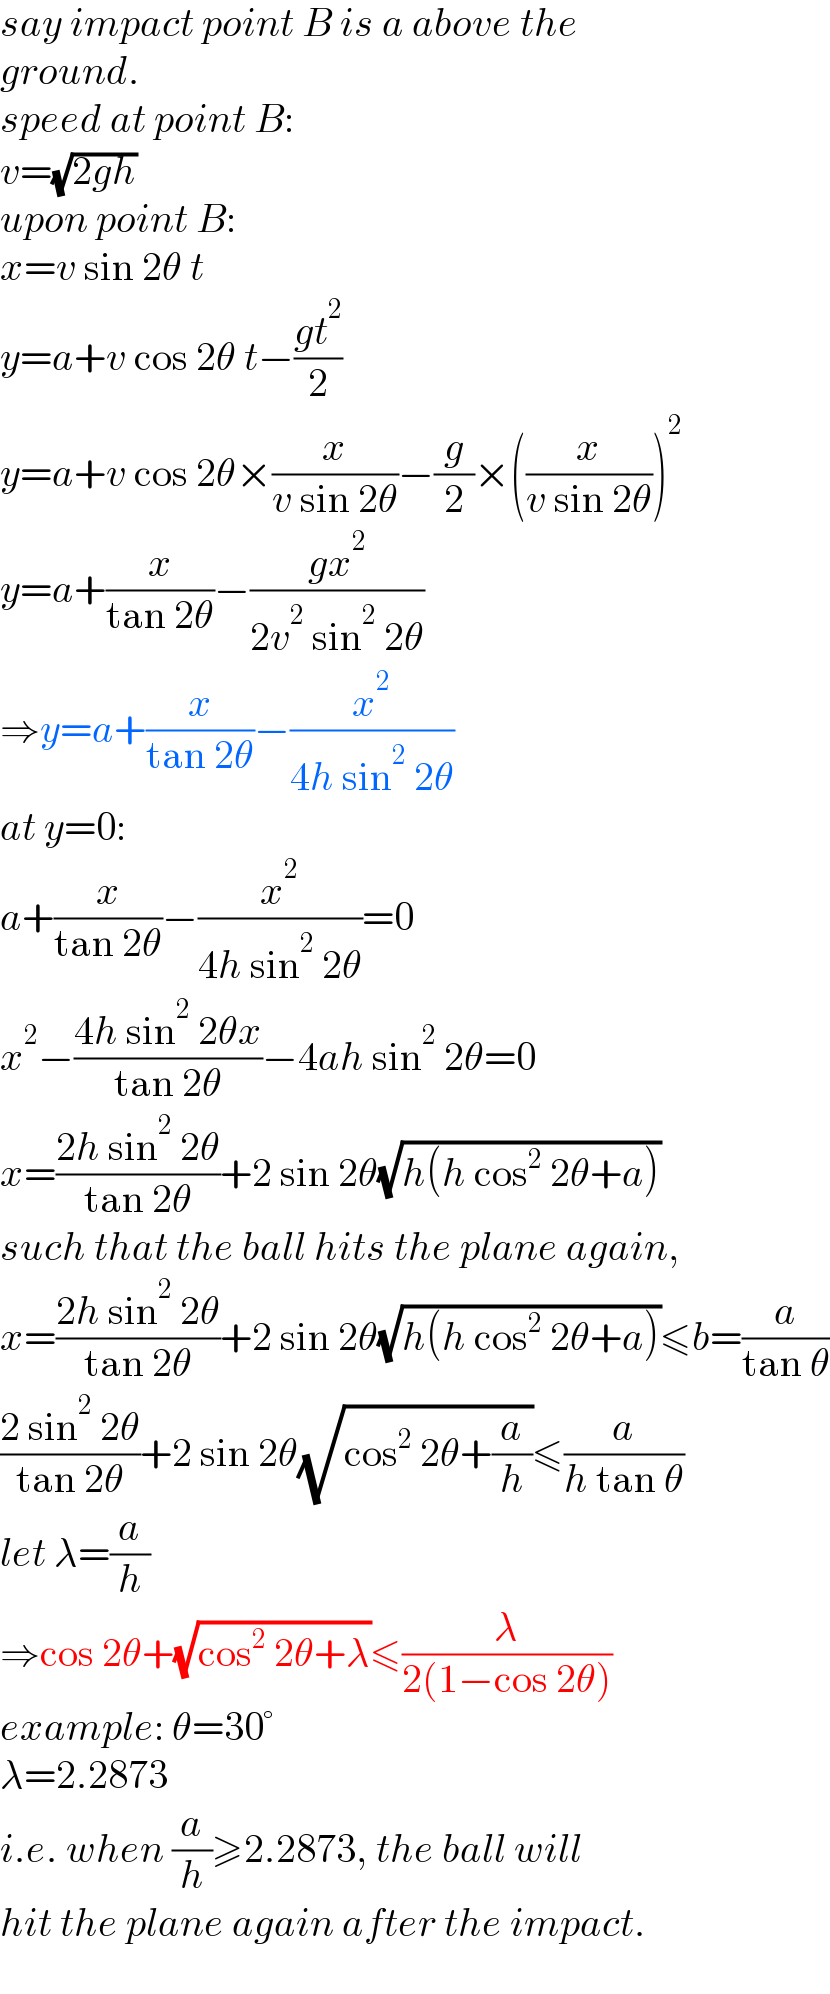 say impact point B is a above the  ground.  speed at point B:  v=(√(2gh))  upon point B:  x=v sin 2θ t  y=a+v cos 2θ t−((gt^2 )/2)  y=a+v cos 2θ×(x/(v sin 2θ))−(g/2)×((x/(v sin 2θ)))^2   y=a+(x/(tan 2θ))−((gx^2 )/(2v^2  sin^2  2θ))  ⇒y=a+(x/(tan 2θ))−(x^2 /(4h sin^2  2θ))  at y=0:  a+(x/(tan 2θ))−(x^2 /(4h sin^2  2θ))=0  x^2 −((4h sin^2  2θx)/(tan 2θ))−4ah sin^2  2θ=0  x=((2h sin^2  2θ)/(tan 2θ))+2 sin 2θ(√(h(h cos^2  2θ+a)))  such that the ball hits the plane again,  x=((2h sin^2  2θ)/(tan 2θ))+2 sin 2θ(√(h(h cos^2  2θ+a)))≤b=(a/(tan θ))  ((2 sin^2  2θ)/(tan 2θ))+2 sin 2θ(√(cos^2  2θ+(a/h)))≤(a/(h tan θ))  let λ=(a/h)  ⇒cos 2θ+(√(cos^2  2θ+λ))≤(λ/(2(1−cos 2θ)))  example: θ=30°  λ=2.2873  i.e. when (a/h)≥2.2873, the ball will  hit the plane again after the impact.  